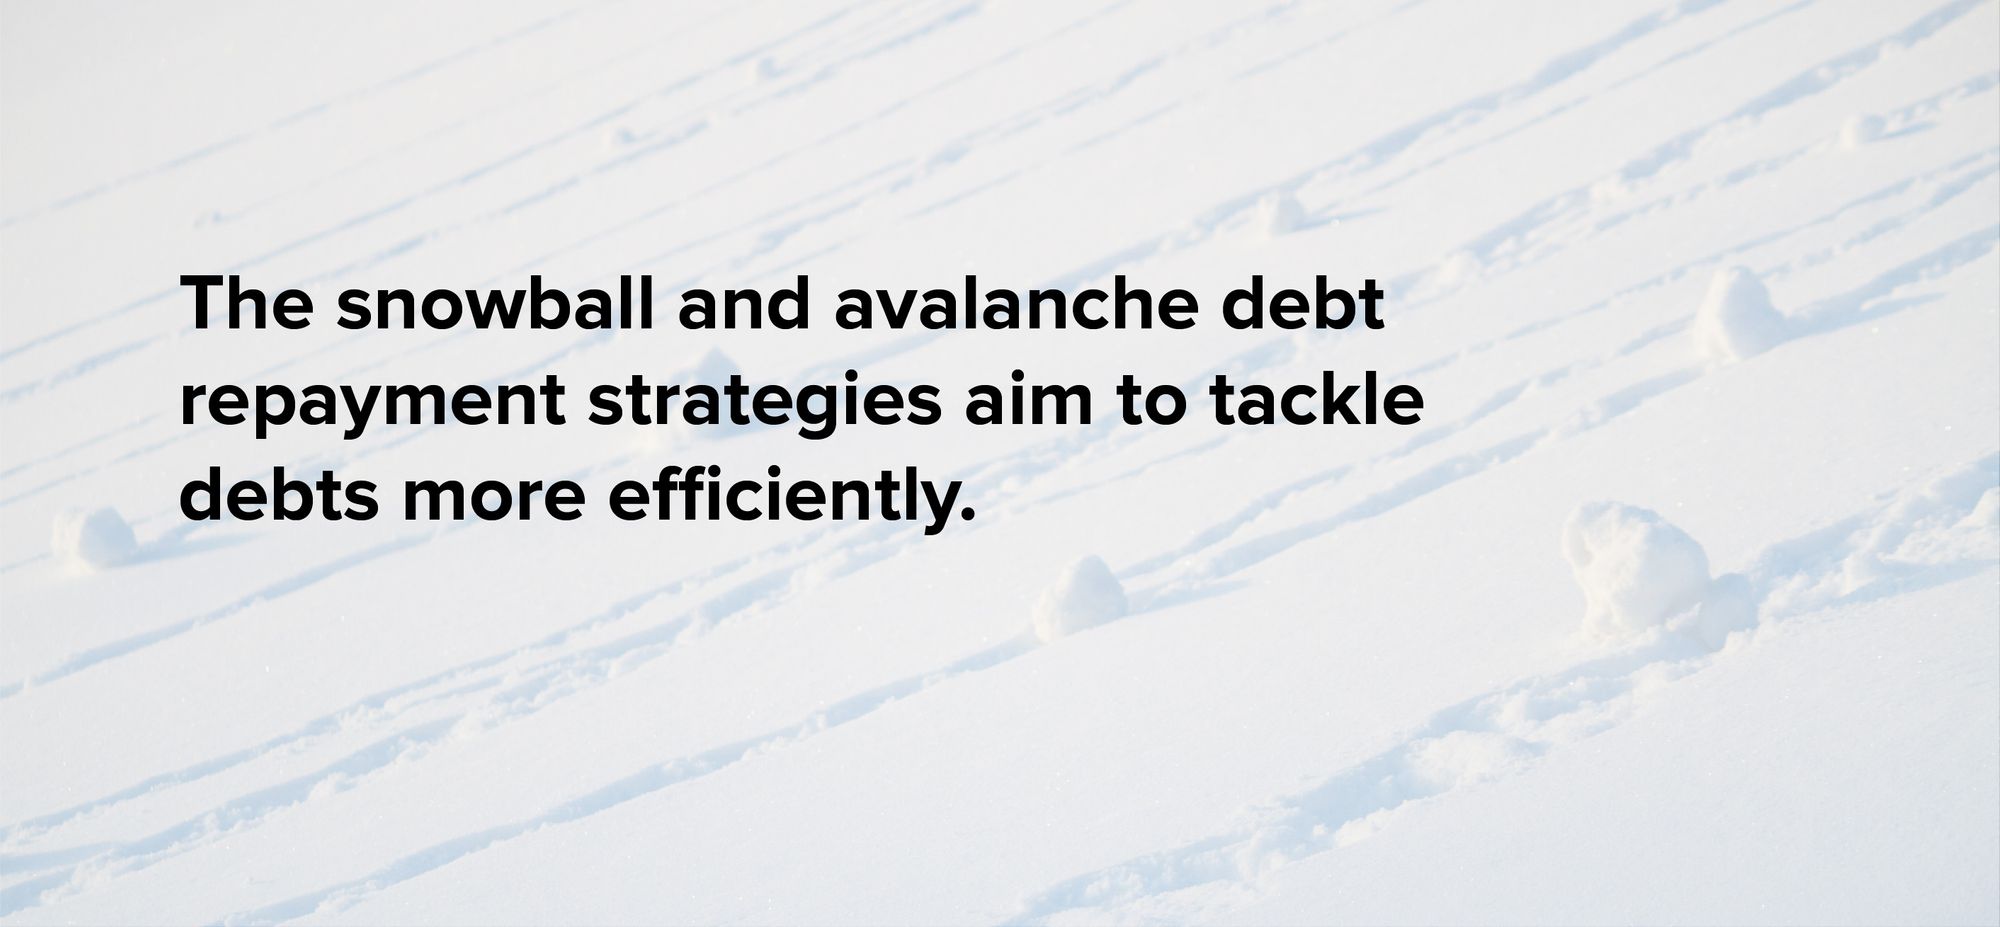 The snowball and avalanche debt repayment strategies aim to tackle debts more efficiently.